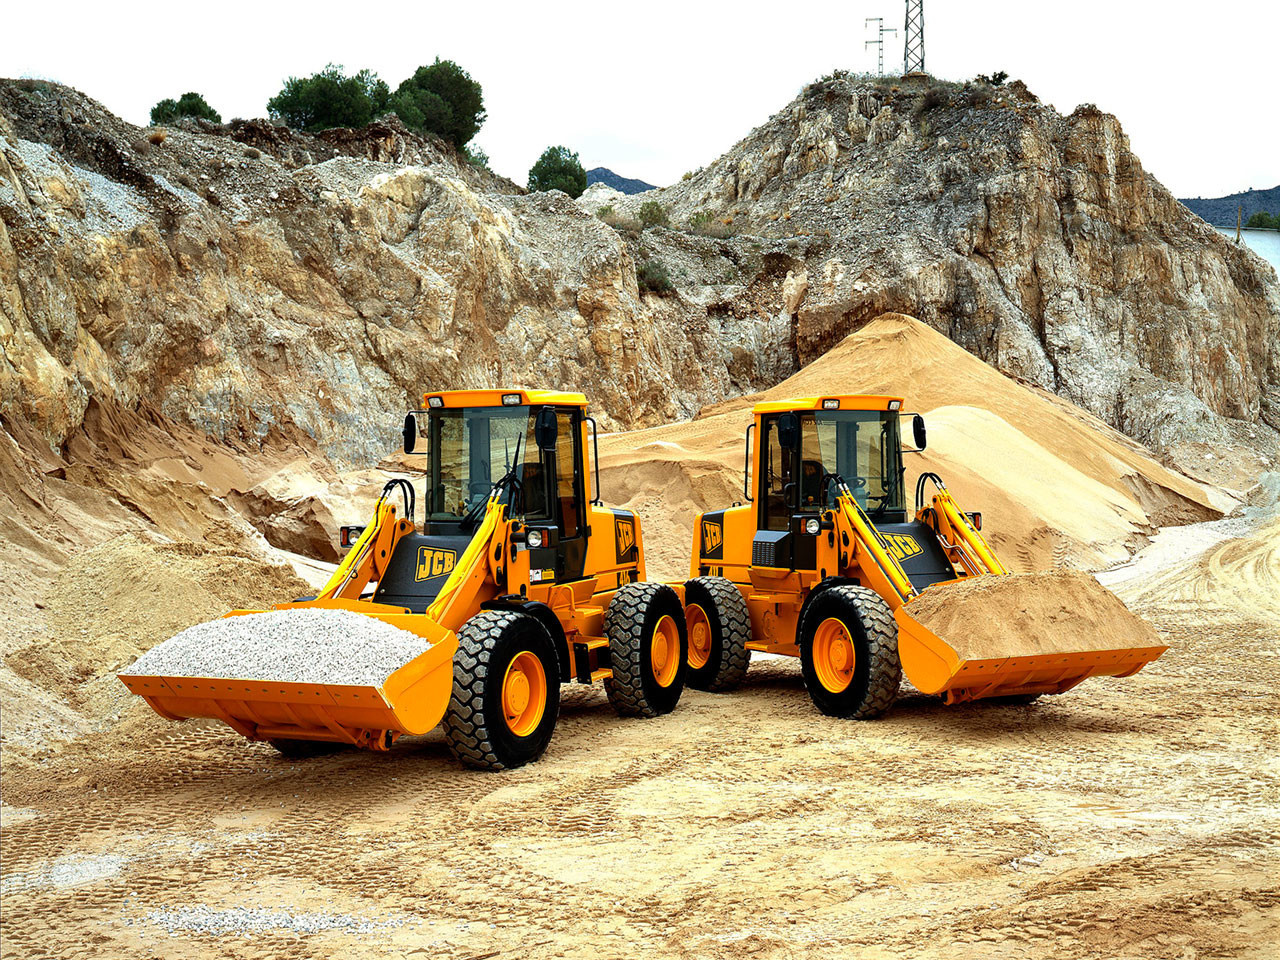 La pala gommata Jcb compie 50 anni 1680x1260_1558611346_1994---a-new-range-of-machines-with-rear-mounted-cabs-including-the-411-and-416-was-introduced